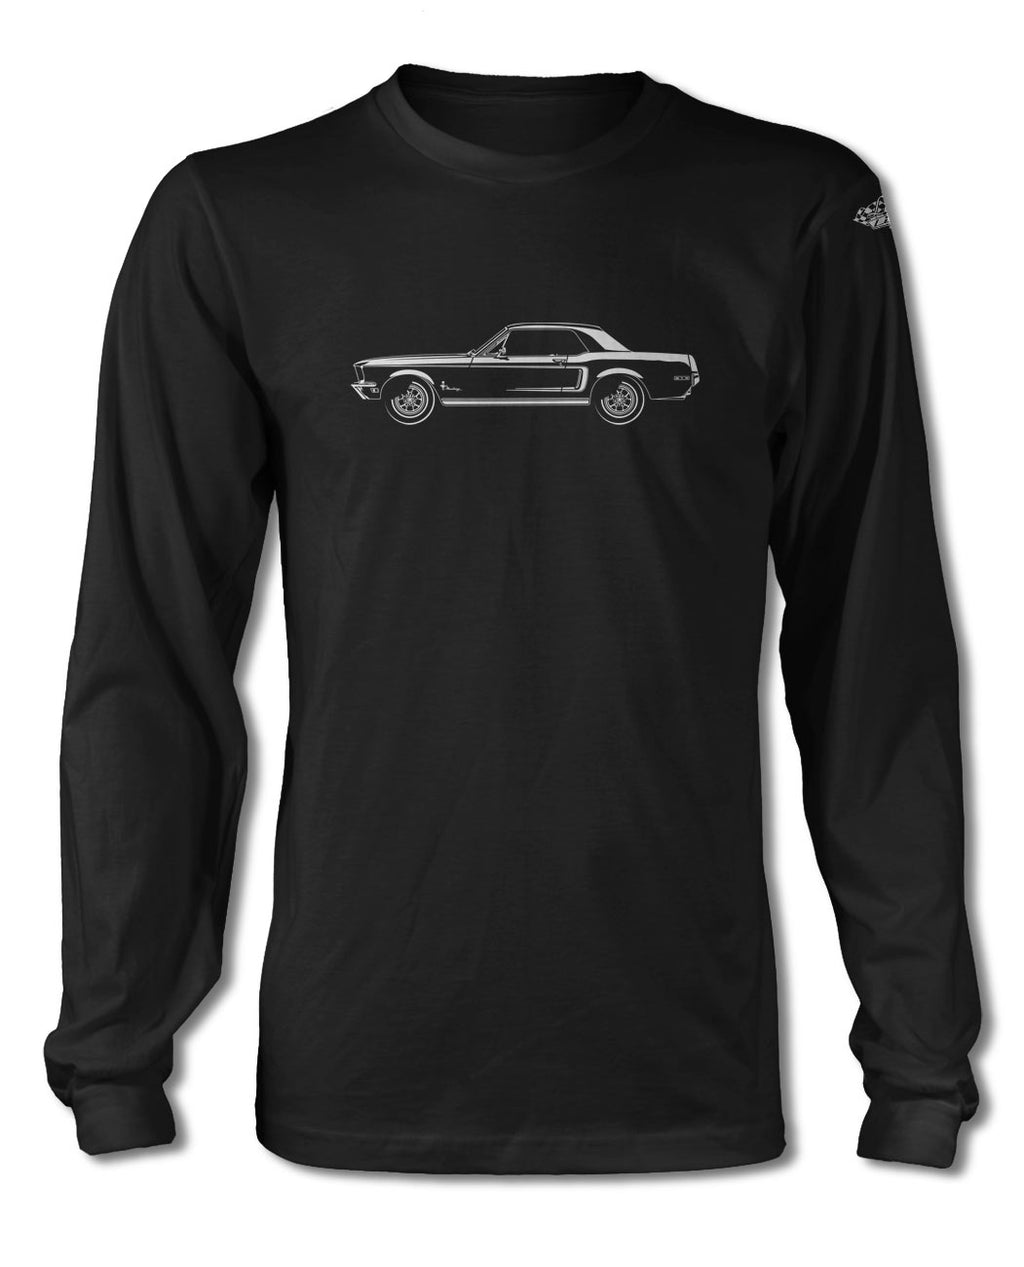 1968 Ford Mustang Base Coupe with Stripes T-Shirt - Long Sleeves - Side View